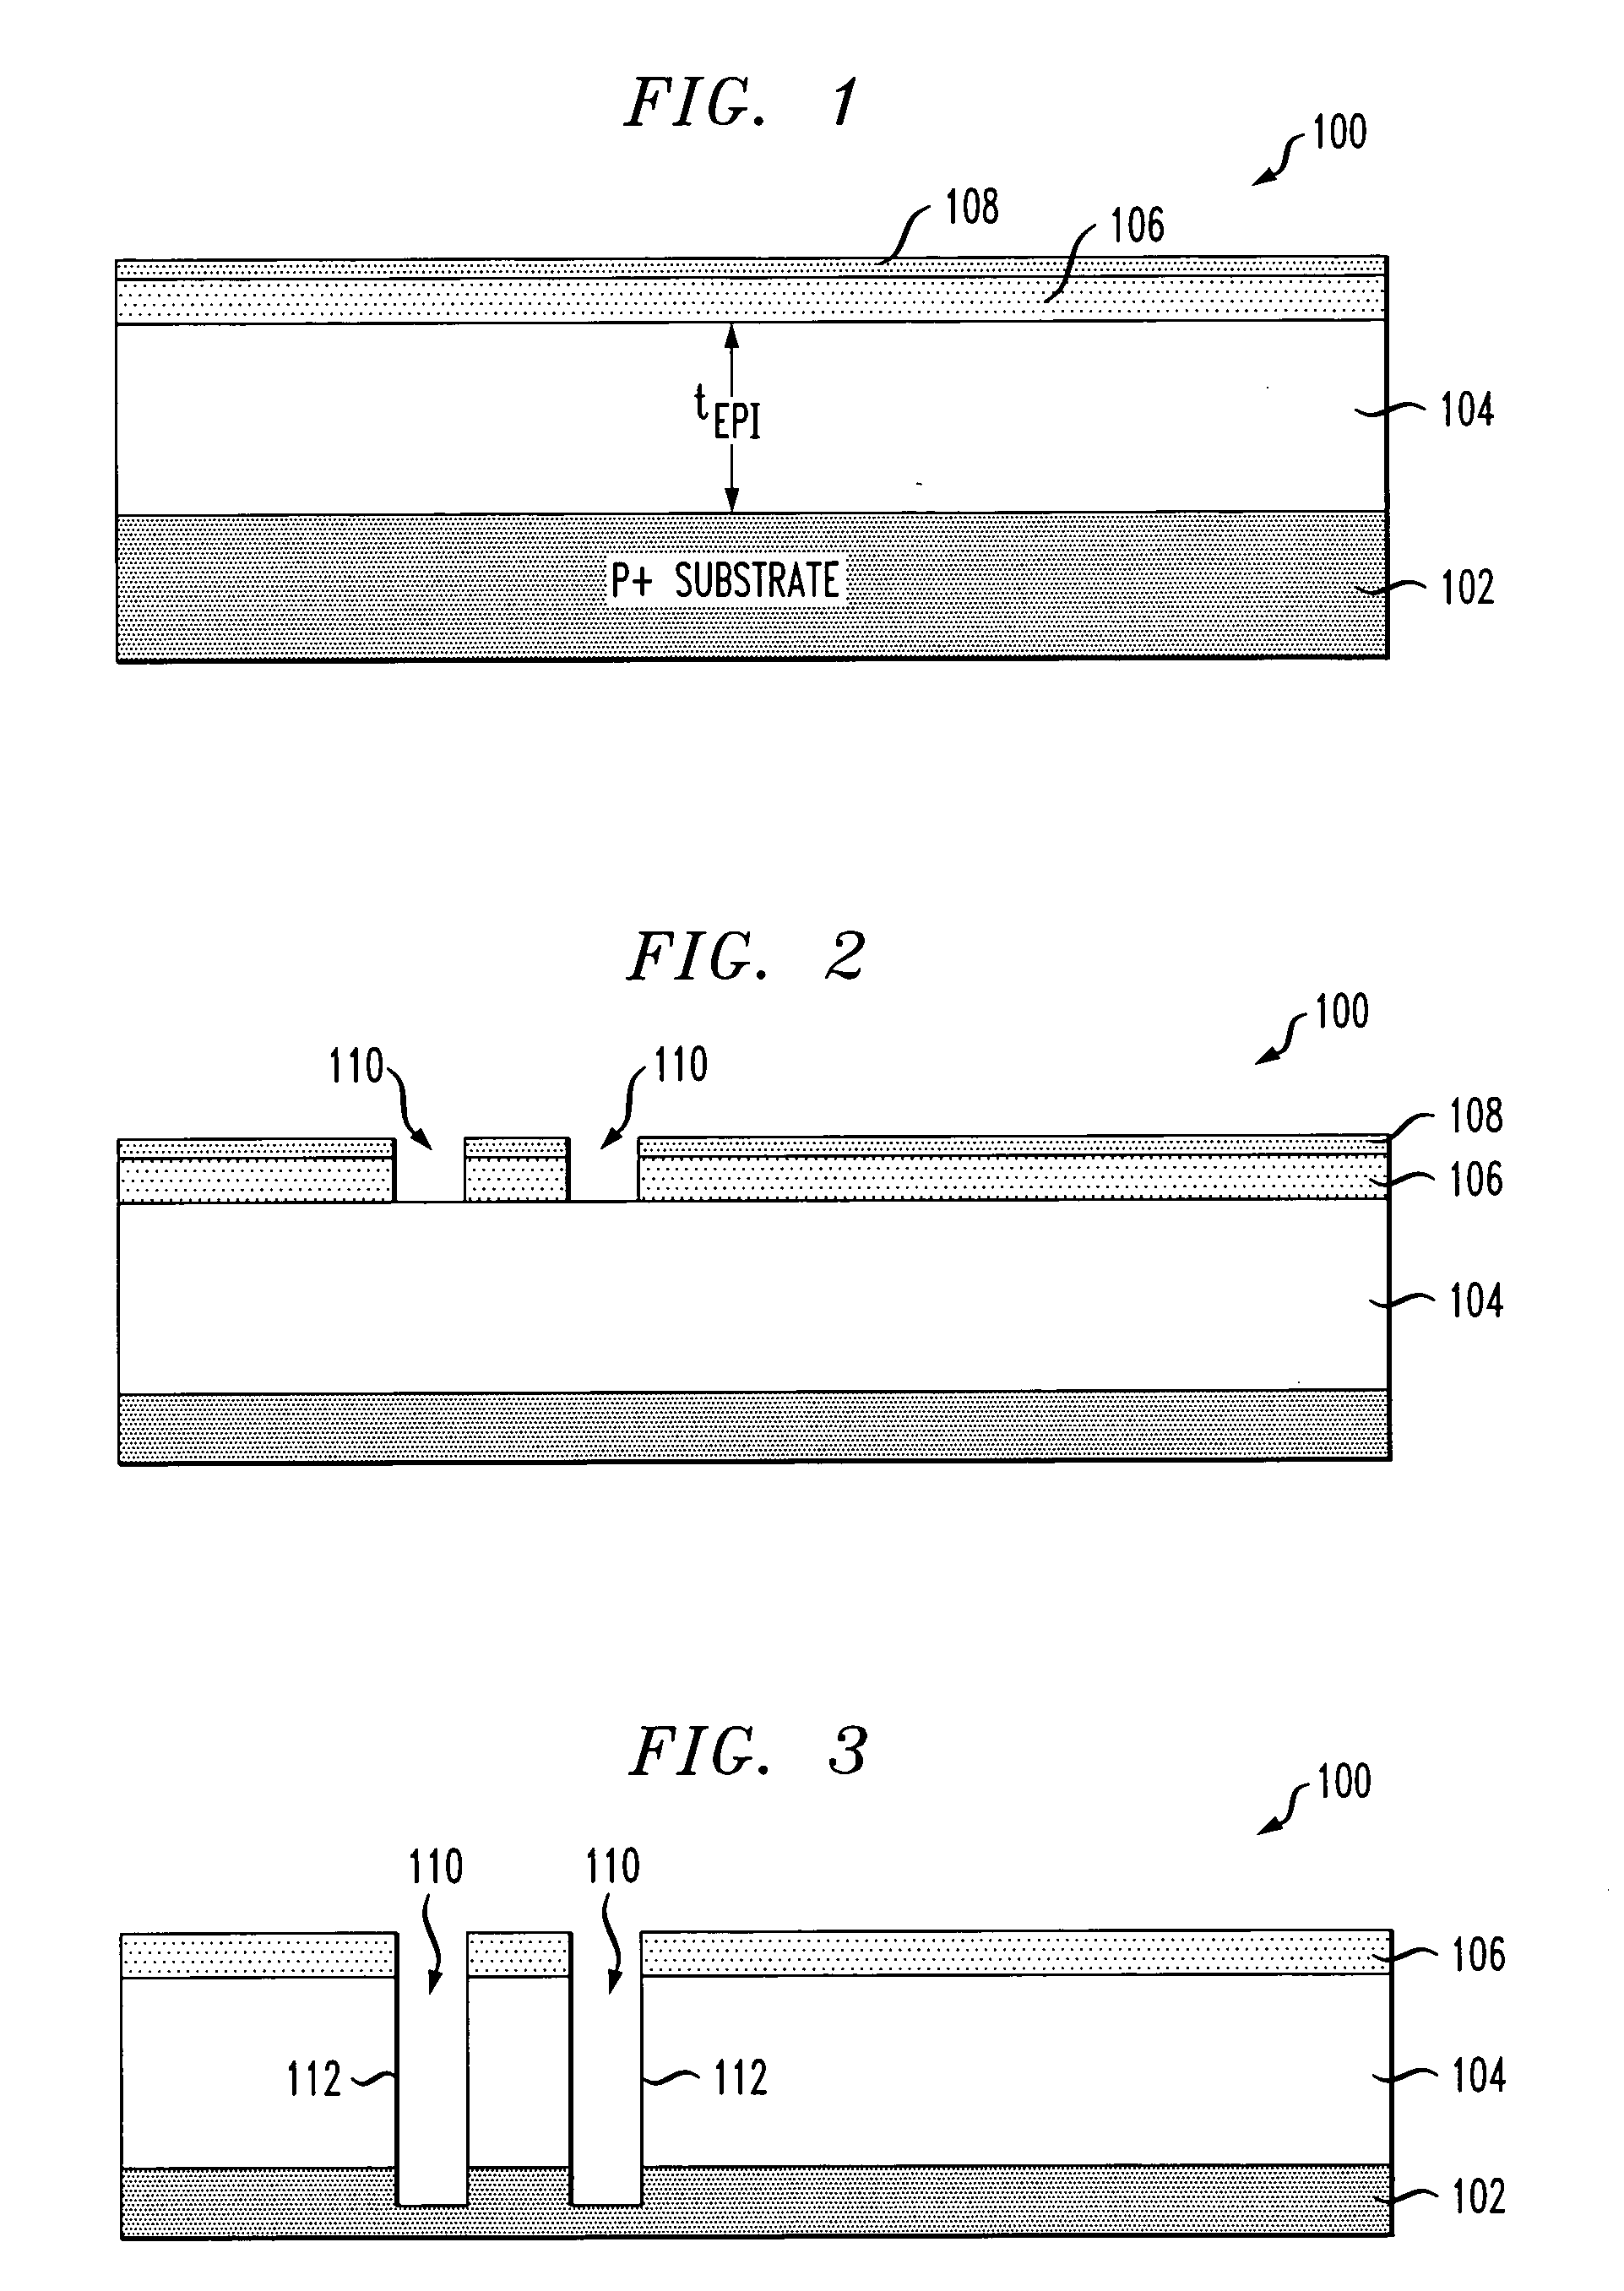 Enhanced substrate contact for a semiconductor device